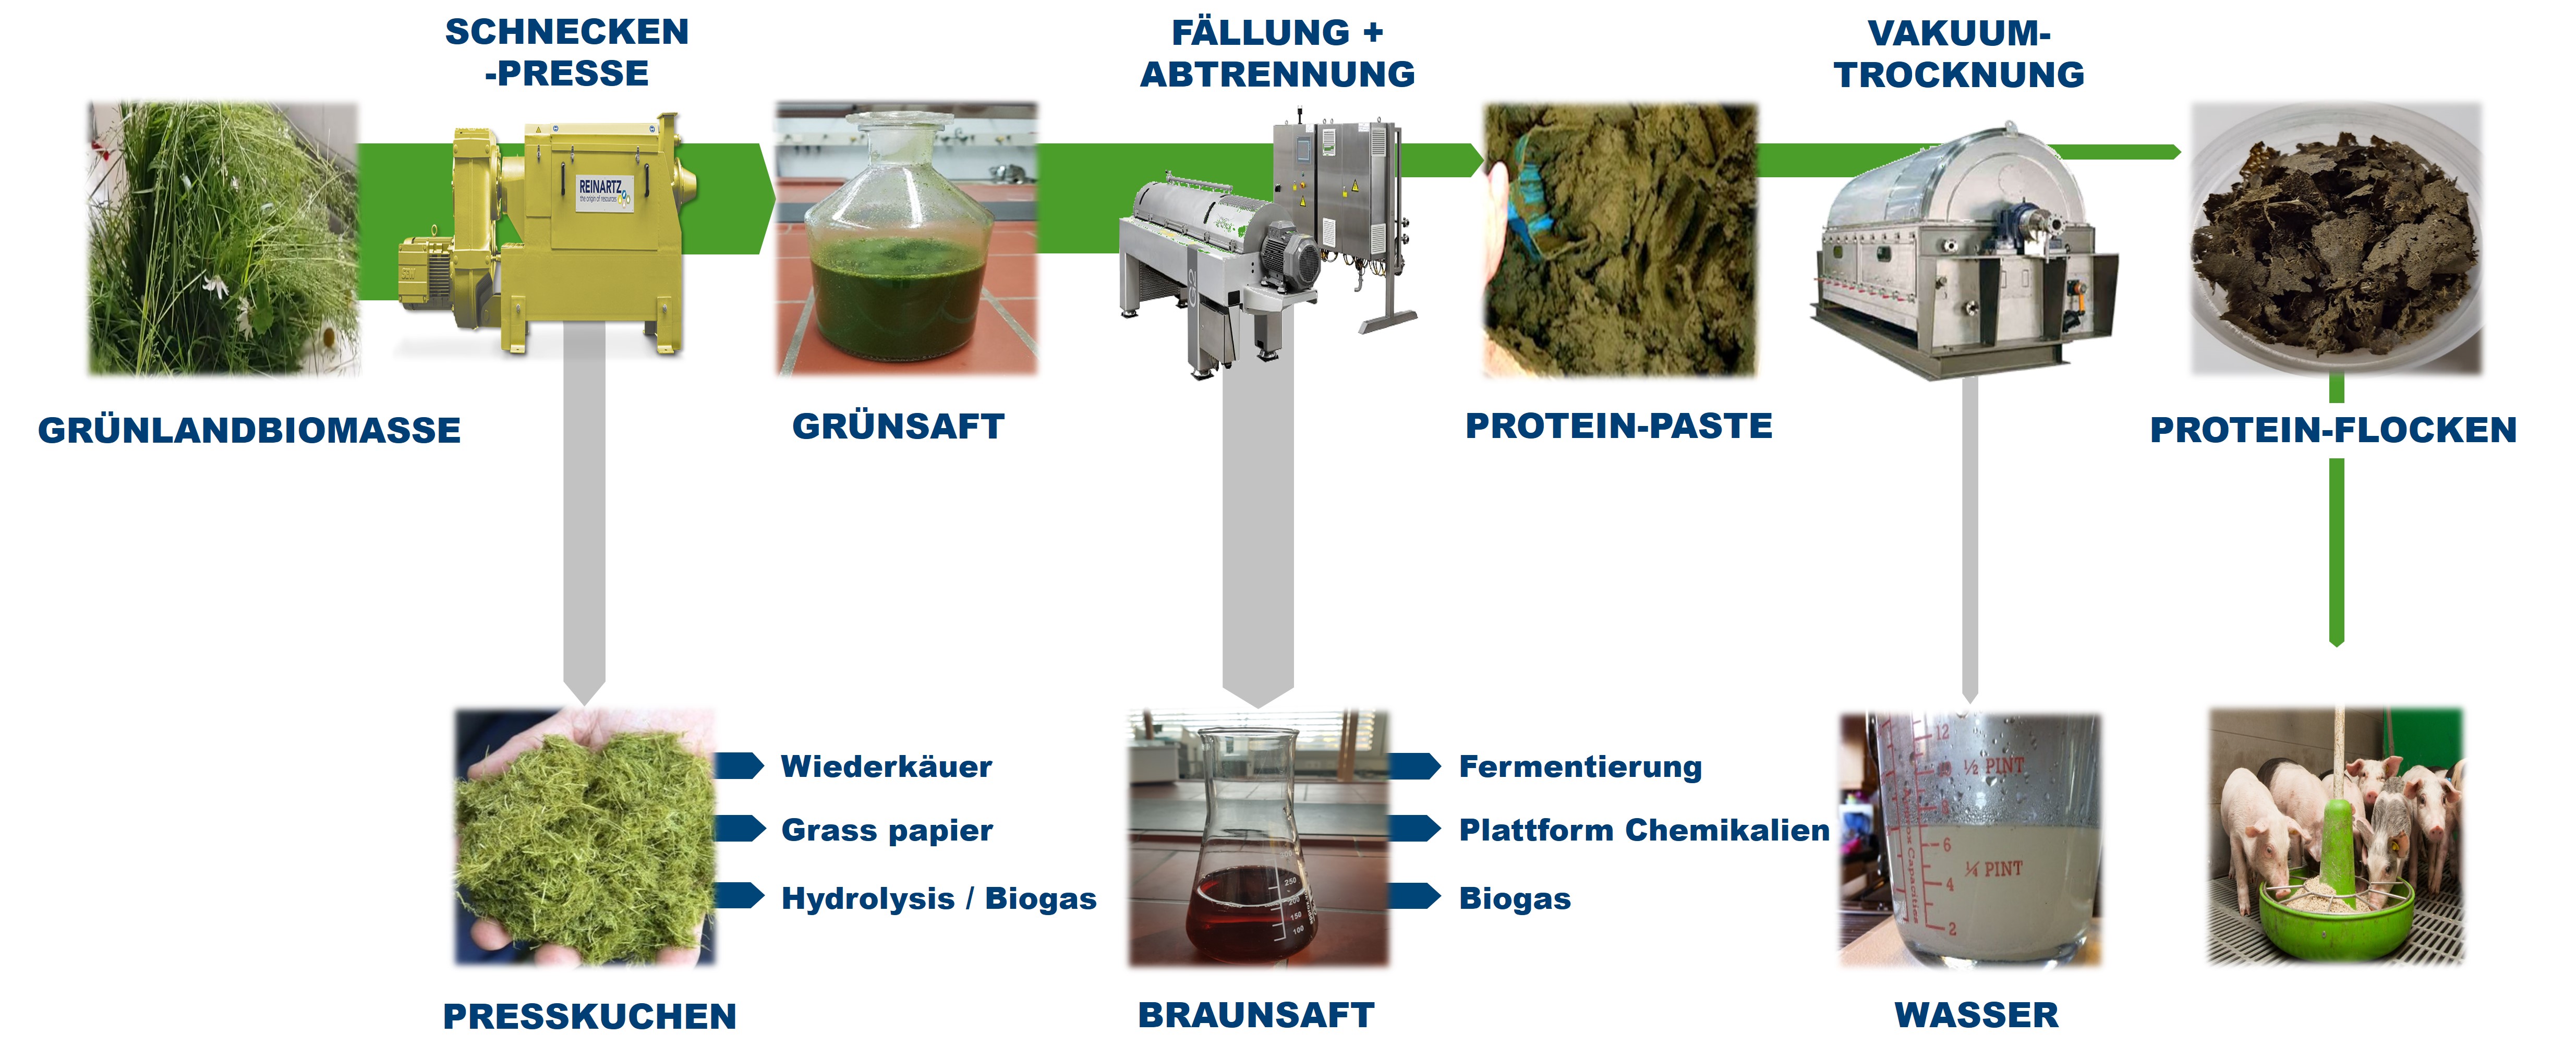 The diagram shows the technological process for extracting proteins from grassland cuttings (top line). The respective step is shown above the green arrows, followed by the intermediate product. Outgoing side streams are shown with a grey arrow pointing downwards.